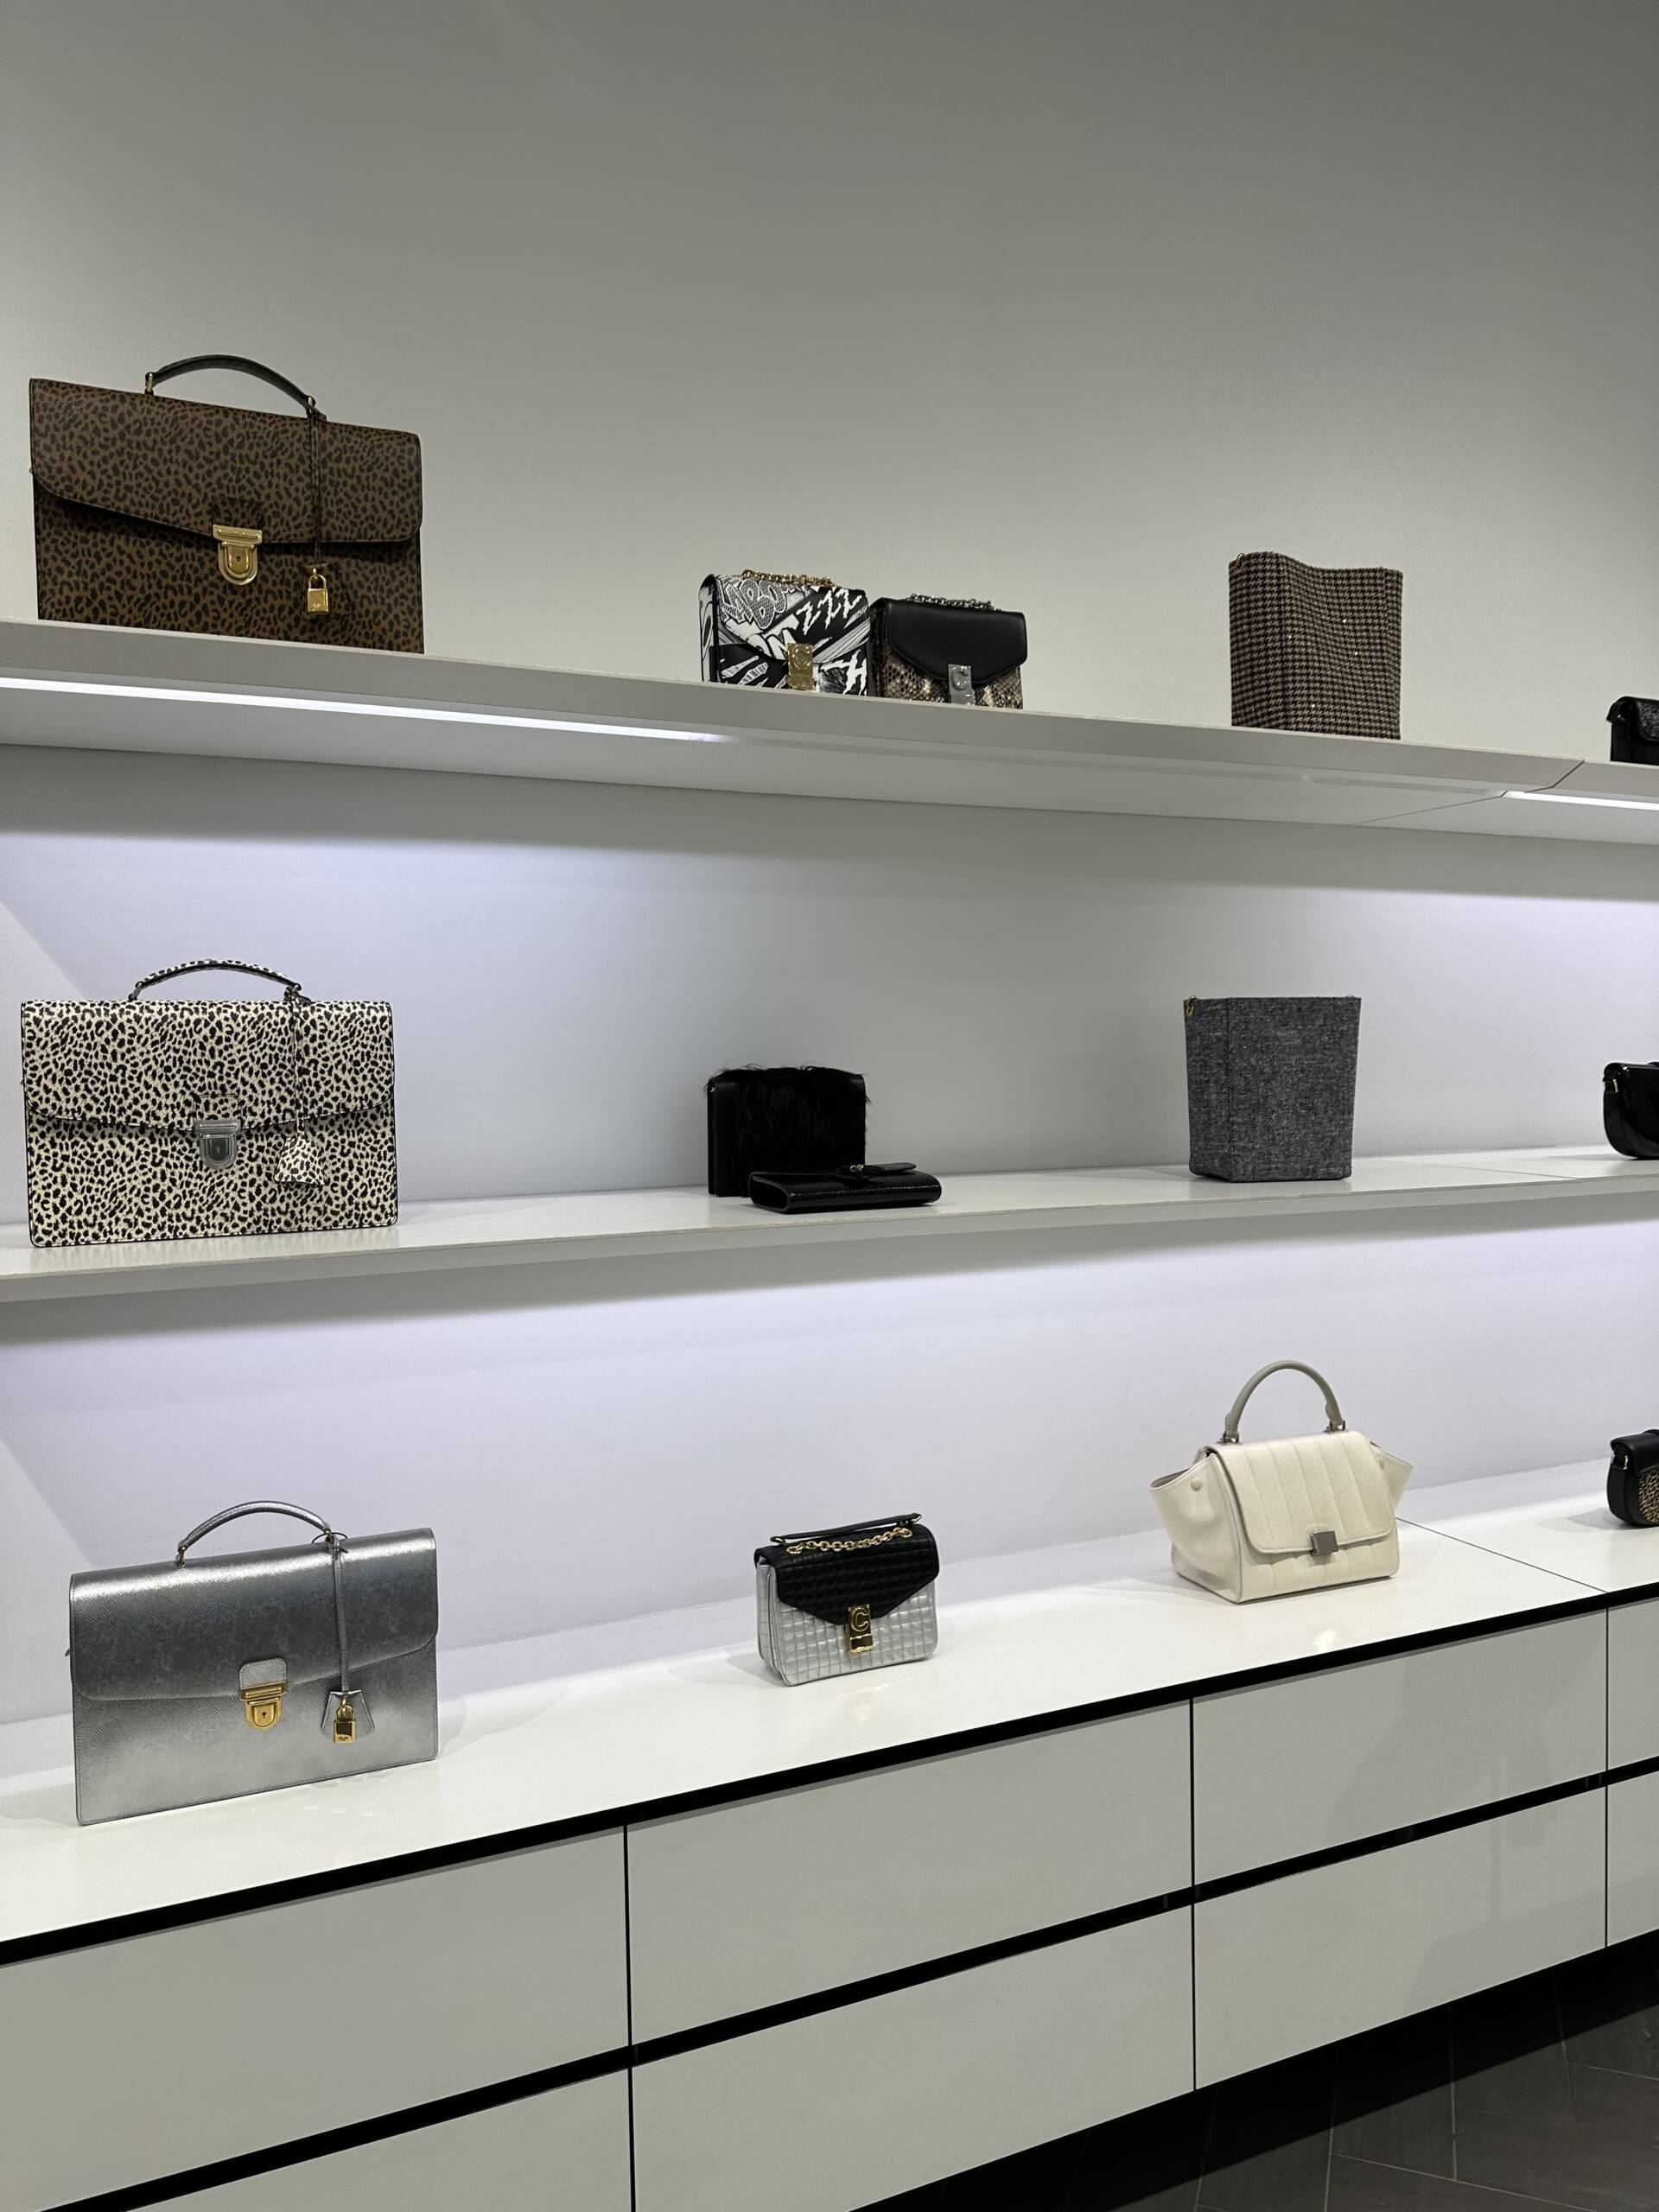 Display bags on the shelf at the Celine outlet in La Vallee Village Paris.